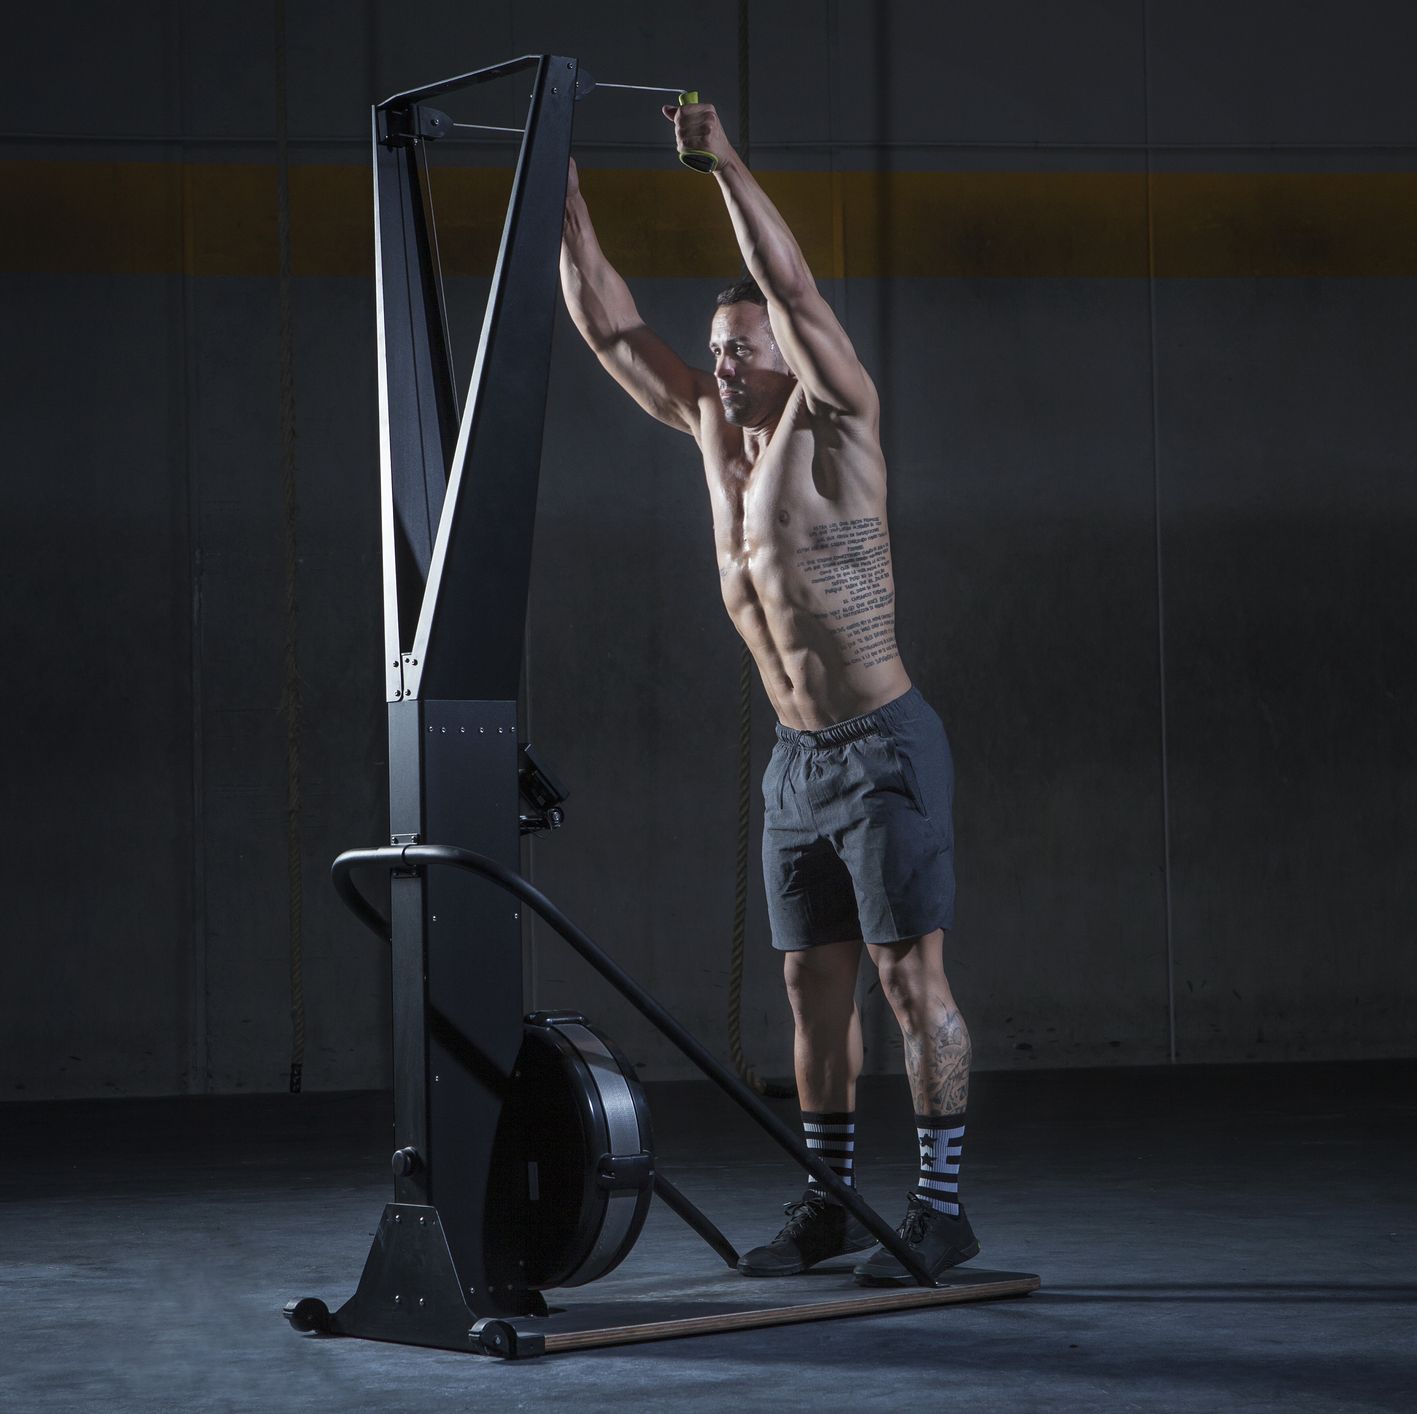 This Underrated Gym Machine Might Be Your Cardio Secret Weapon